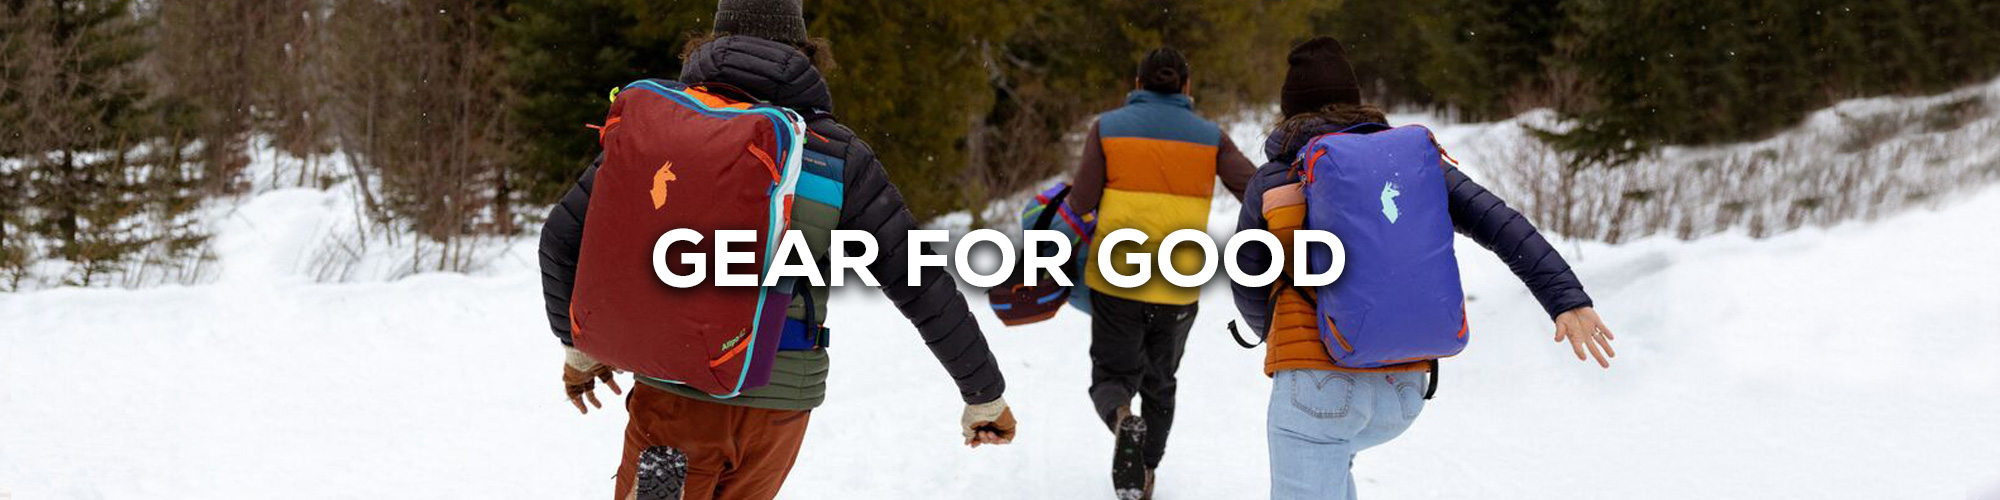 Cotopaxi- Gear for Good